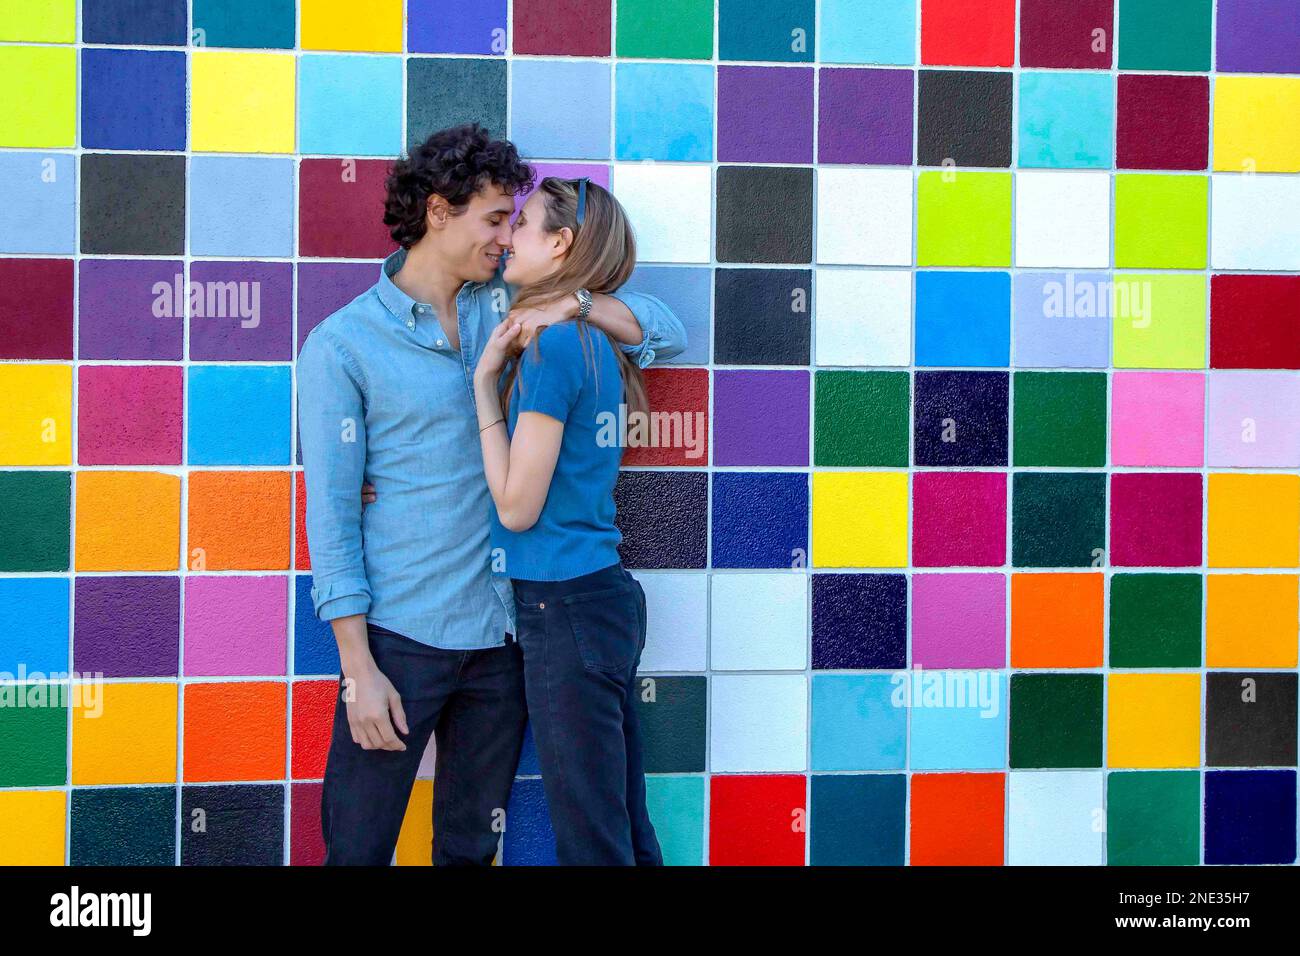 A young couple interlaced in front of colorful tiles Stock Photo